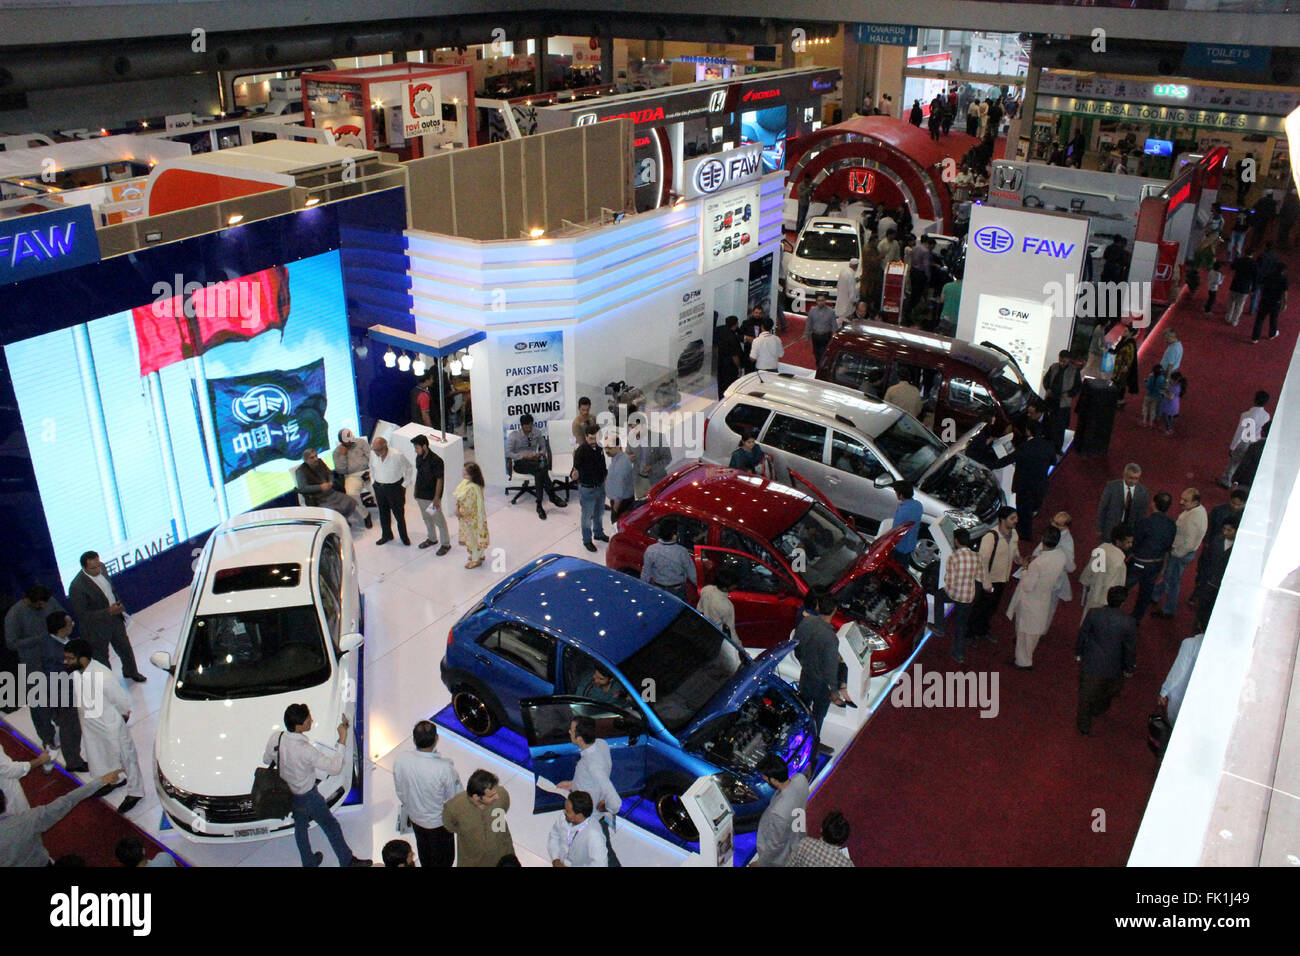 (160305) -- LAHORE, March 5, 2016 (Xinhua) -- People visit at FAW booth at the Pakistan Auto Show 2016 at expo center in eastern Pakistan's Lahore on March 5, 2016. The three-day Pakistan Auto Show 2016 was kicked off at Lahore Expo on Friday, attracted over 135 local and foreign auto-manufacturers. (Xinhua/Jamil Ahmed) Stock Photo